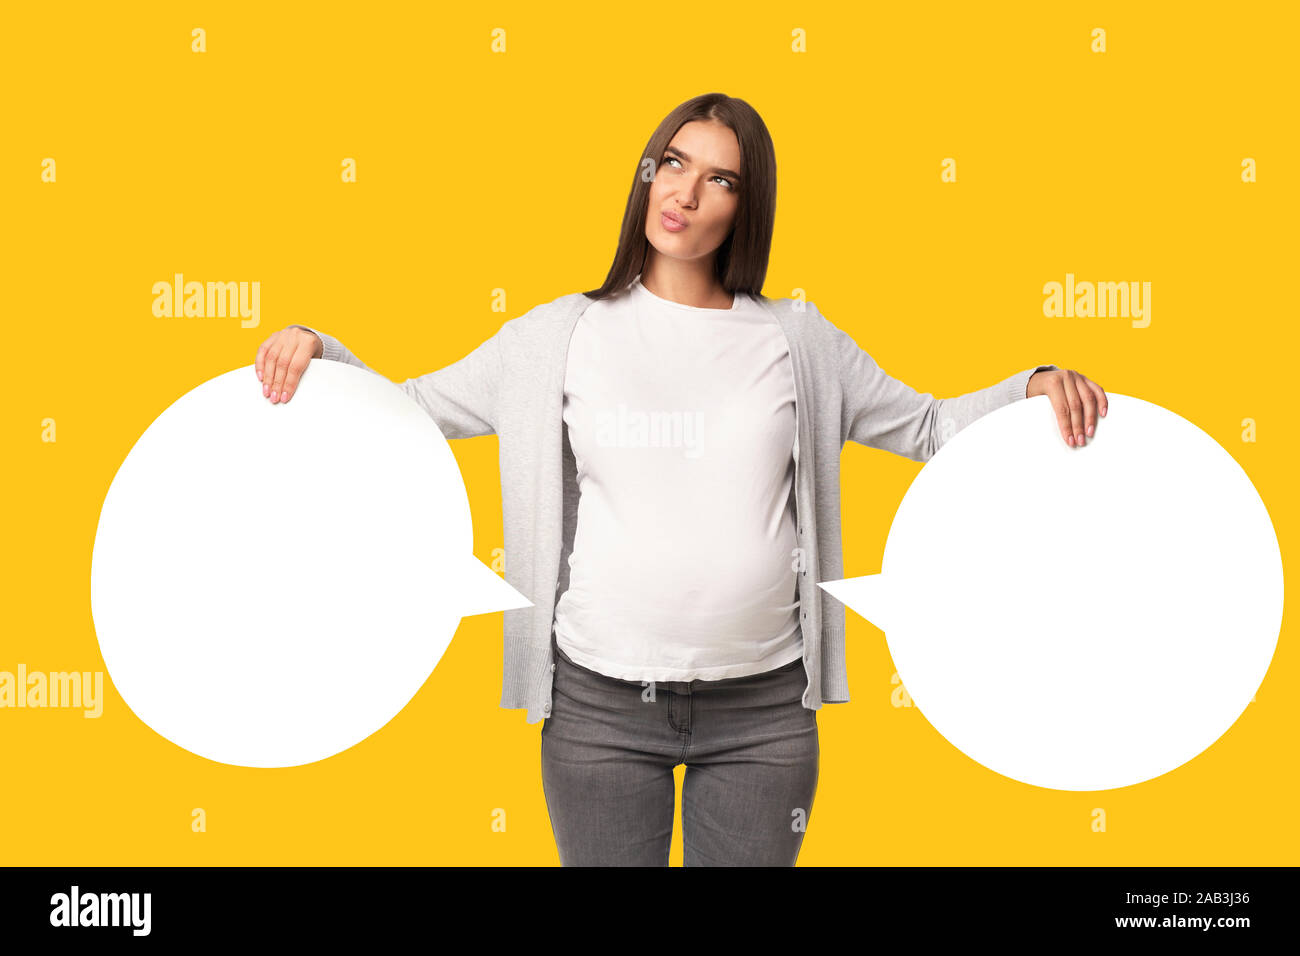 Pregnant Lady Holding Two Speech Bubbles Near Belly, Yellow Background Stock Photo